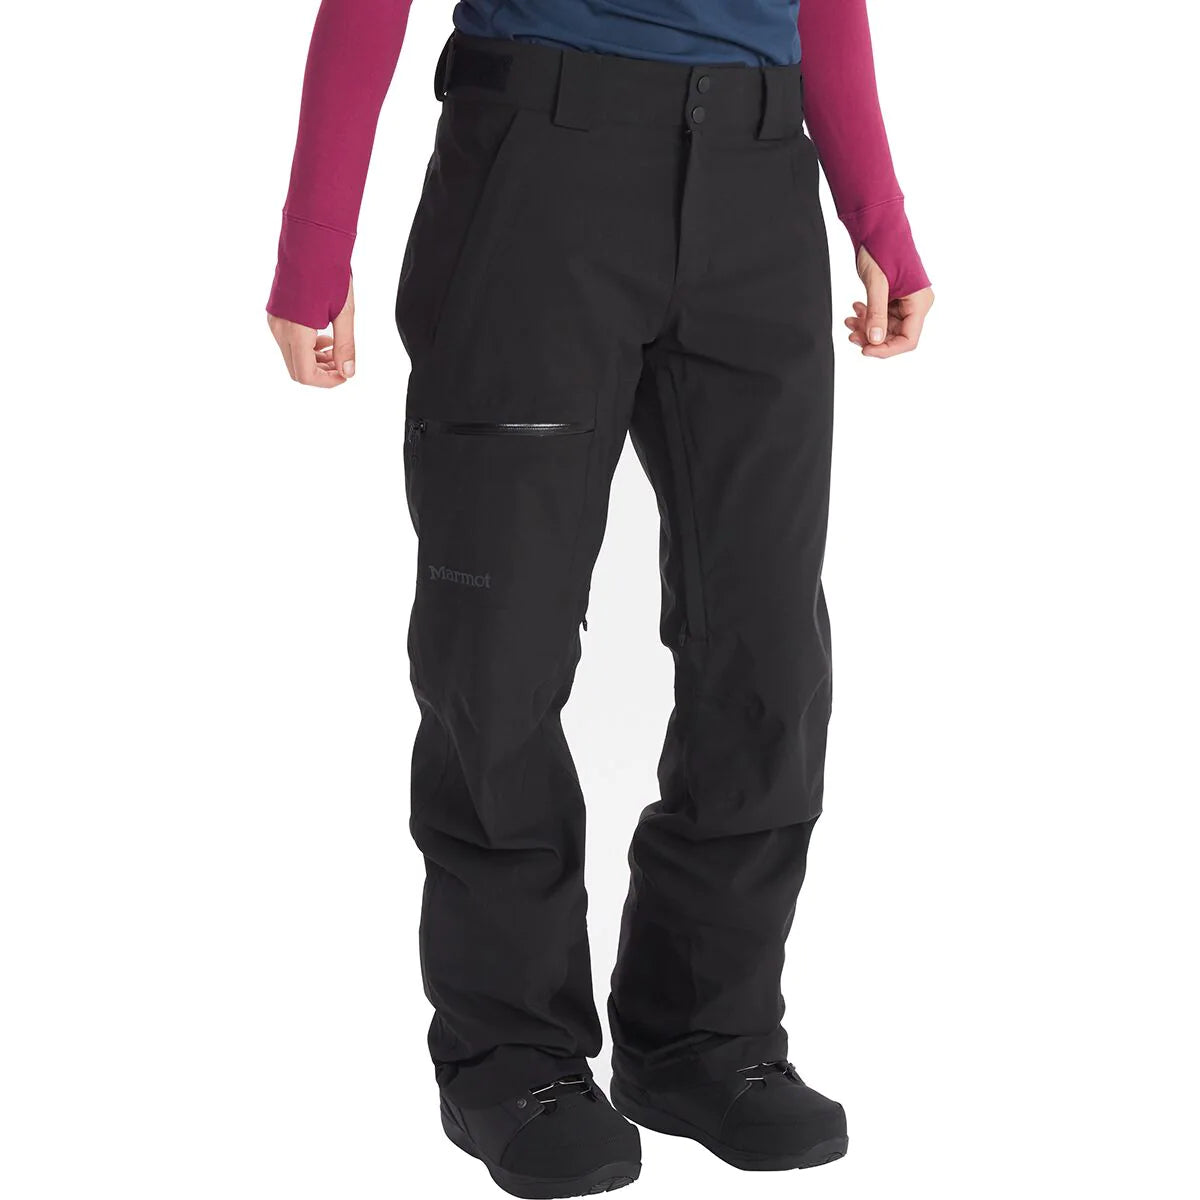  Water resistant women's pant, reinforced zippers. 